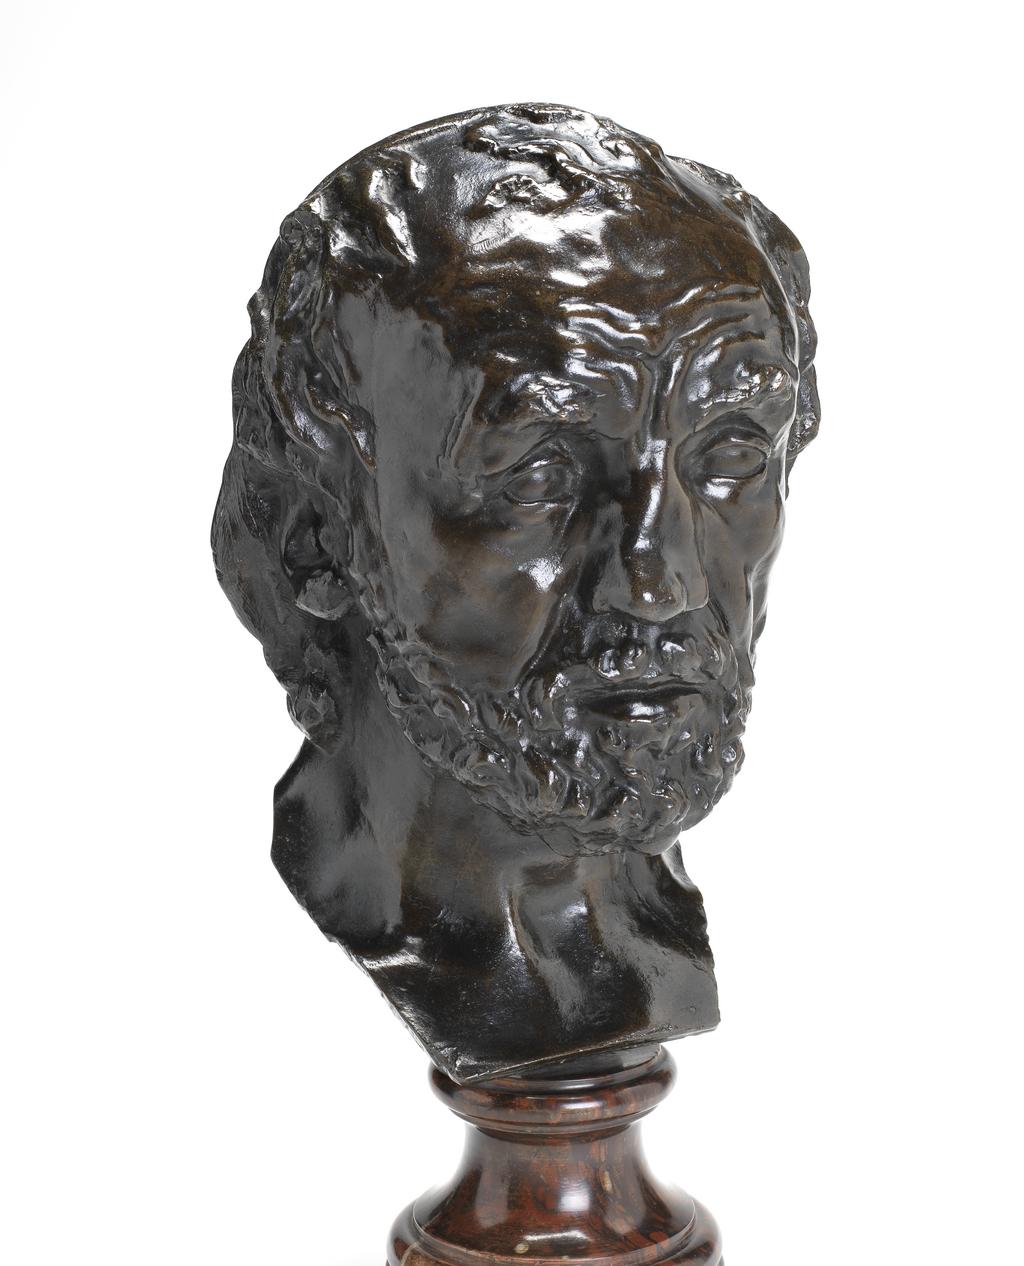 An image of Man with a broken nose ( L'homme au nez cassé). Rodin, Auguste (French, 1840-1917). Bronze, cast, with brown patina, and touches of green, height (whole) 31.1 cm, circa 1881-1916, conceived in plaster 1863-1864. Colmar, Paris. Notes: A marble bust was exhibited at the Salon in 1878. Four bronze casts were made in 1895 by Griffoul, and twelve between 1916 and 1949 by Alexis Rudier, Paris.